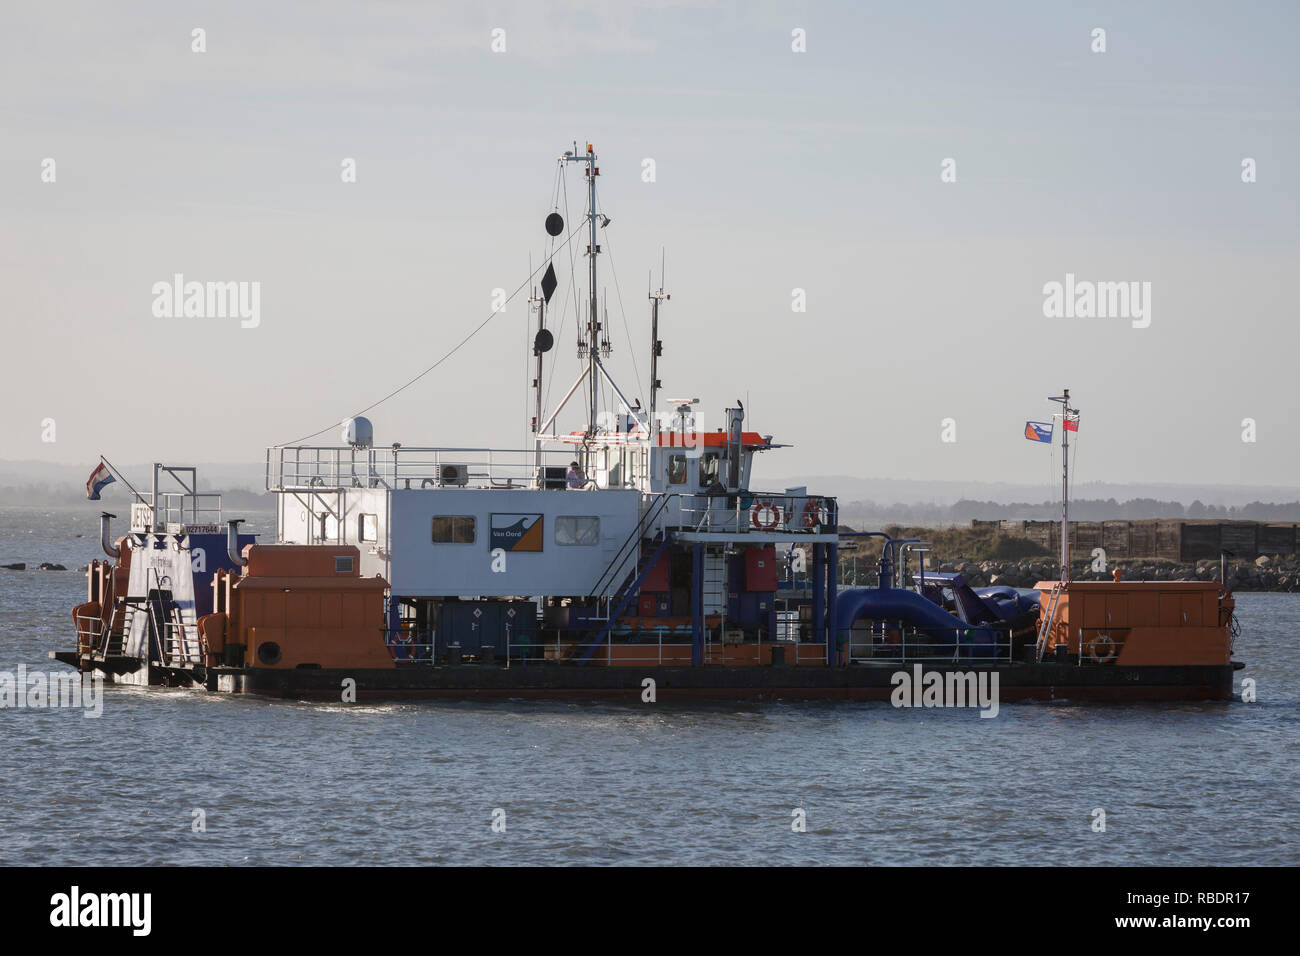 A Dutch-registered dredger works in waters of the Port of Ramsgate, a closed but once busy ferry terminal, on 8th January 2019, in Ramsgate, Kent, England. The Port of Ramsgate has been identified as a 'Brexit Port' by the government of Prime Minister Theresa May, currently negotiating the UK's exit from the EU. Britain's Department of Transport has awarded to an unproven shipping company, Seaborne Freight, to provide run roll-on roll-off ferry services to the road haulage industry between Ostend and the Kent port - in the event of more likely No Deal Brexit. In the EU referendum of 2016, peop Stock Photo